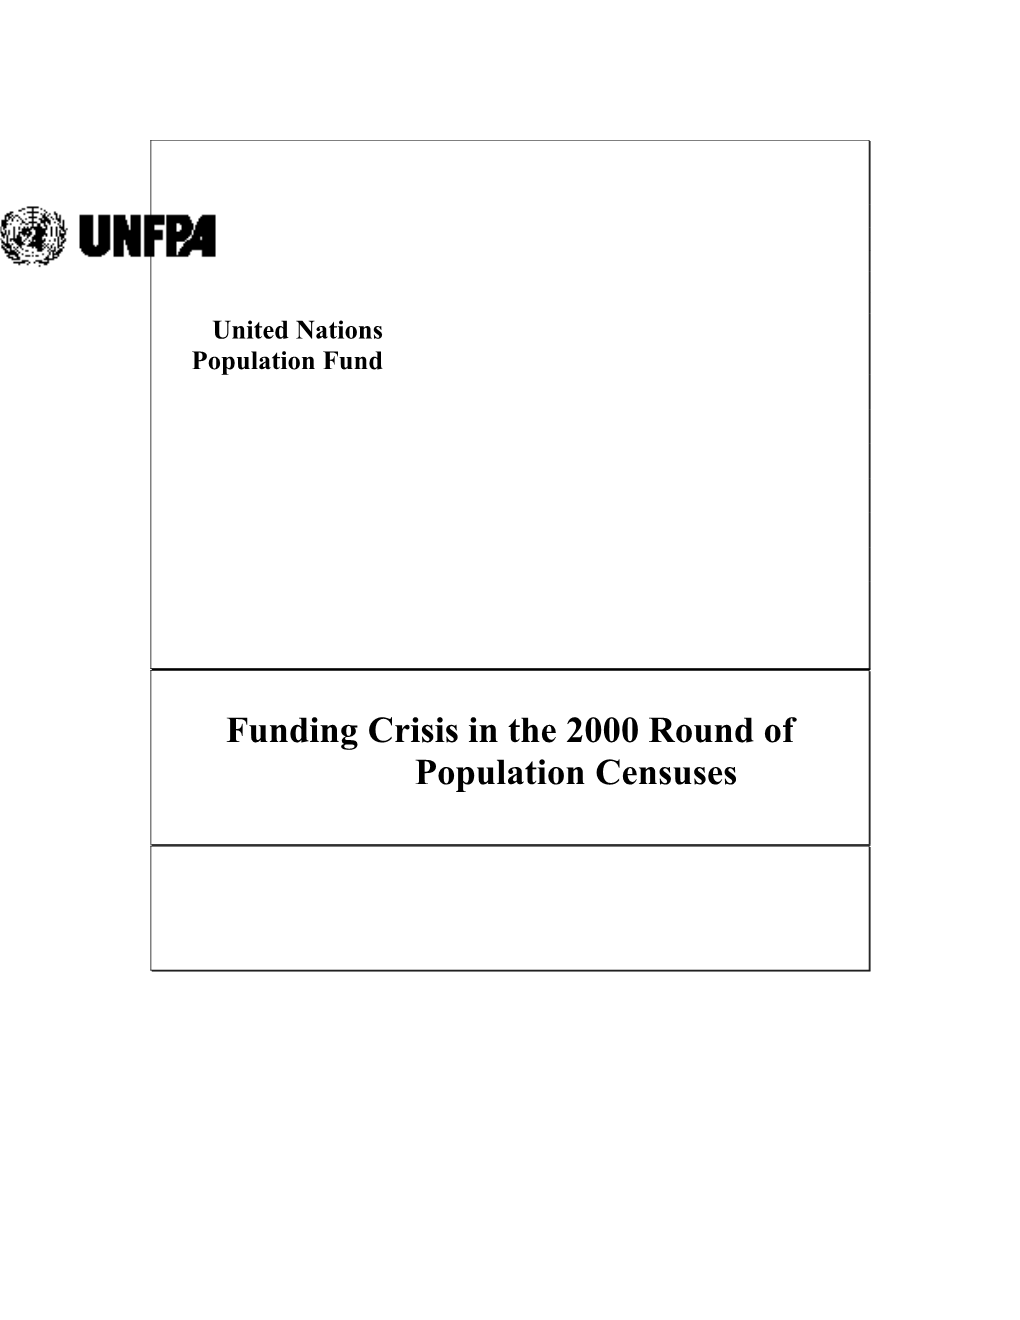 Towards Funding Stability for Population and Housing Censuses